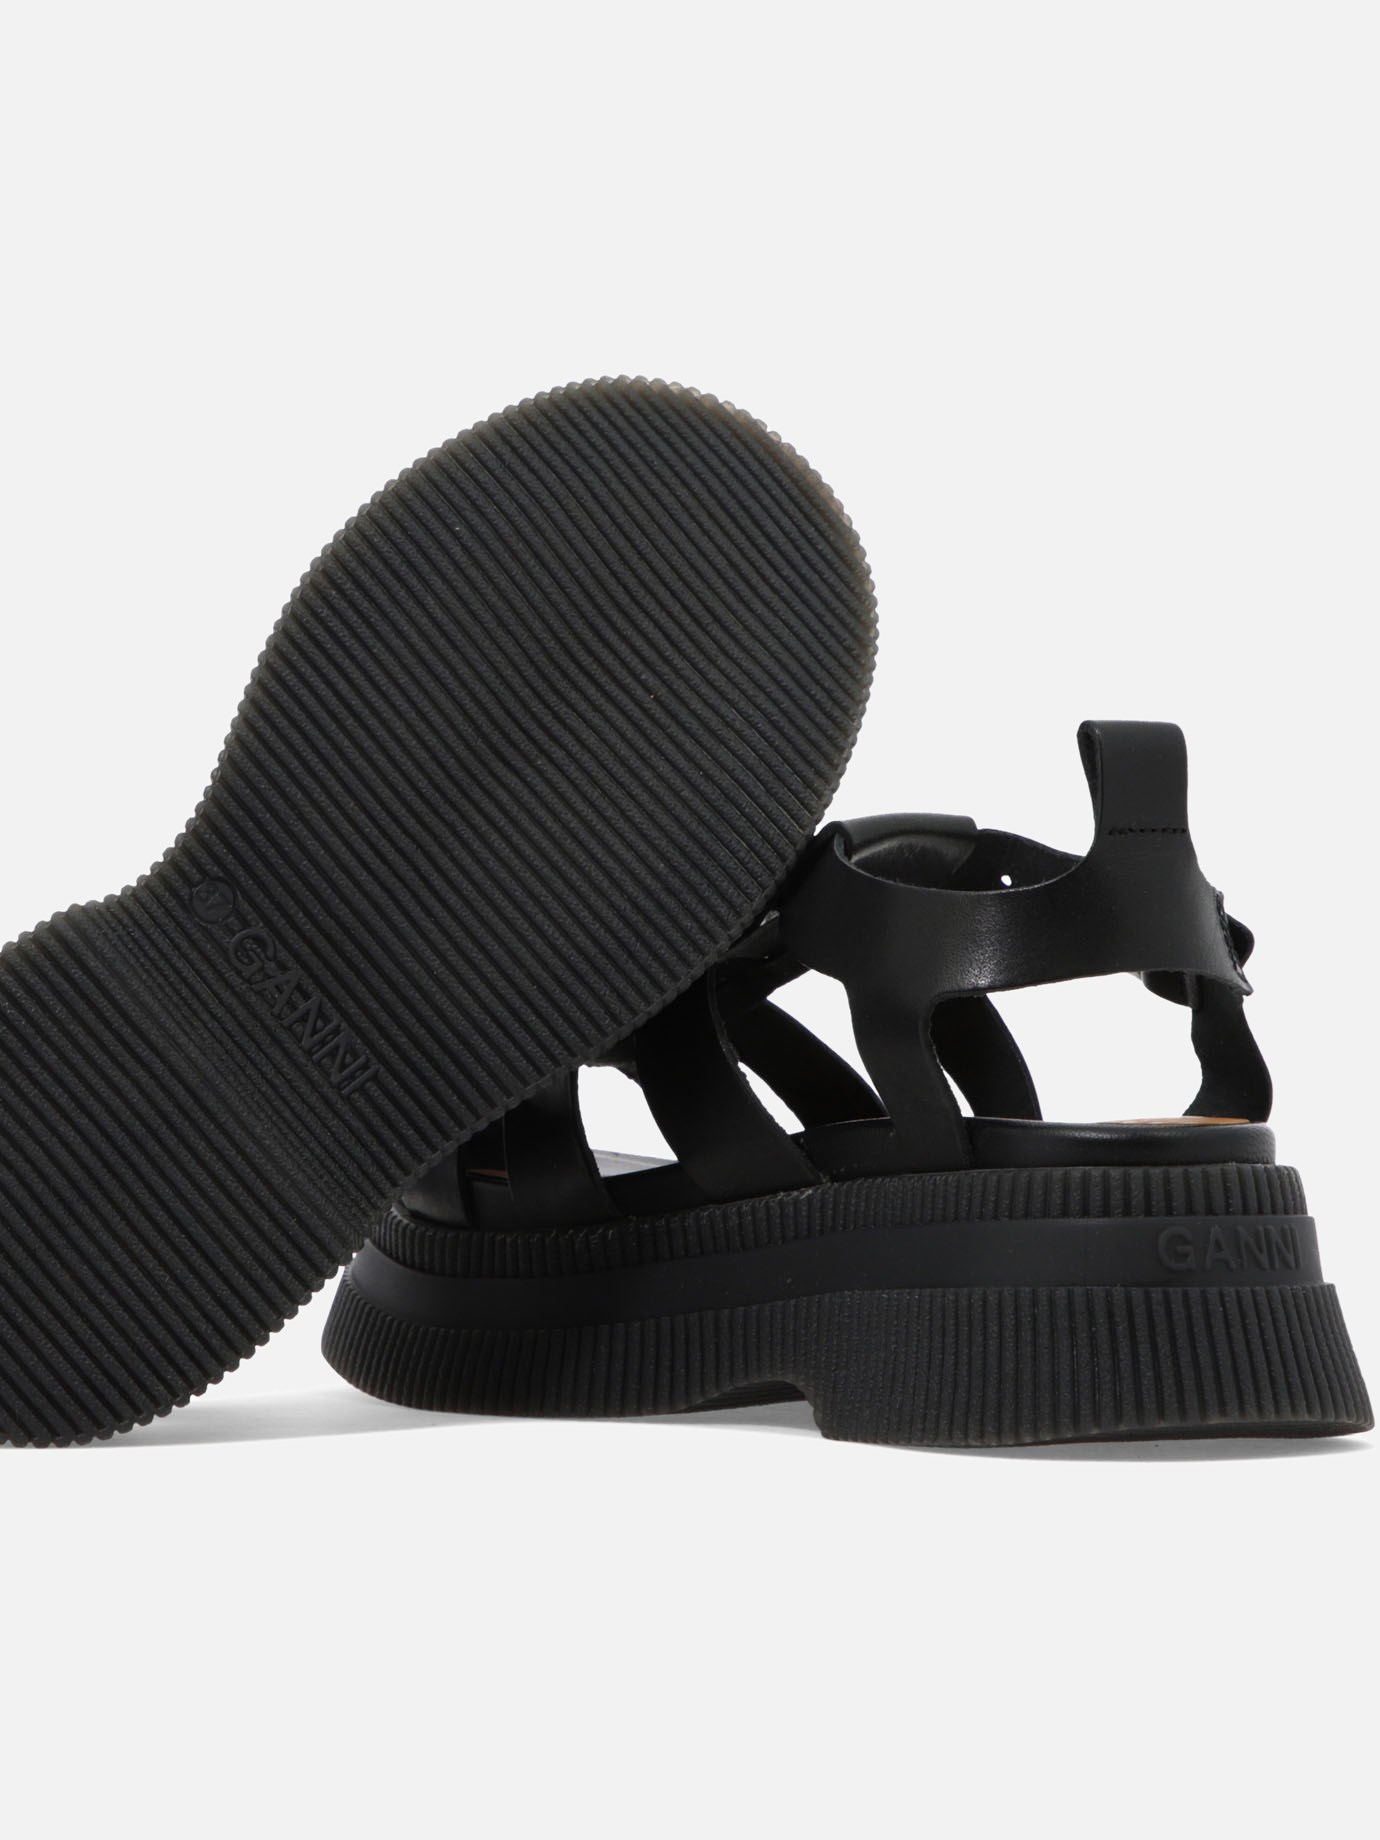  Creepers  sandalsby Ganni - 0